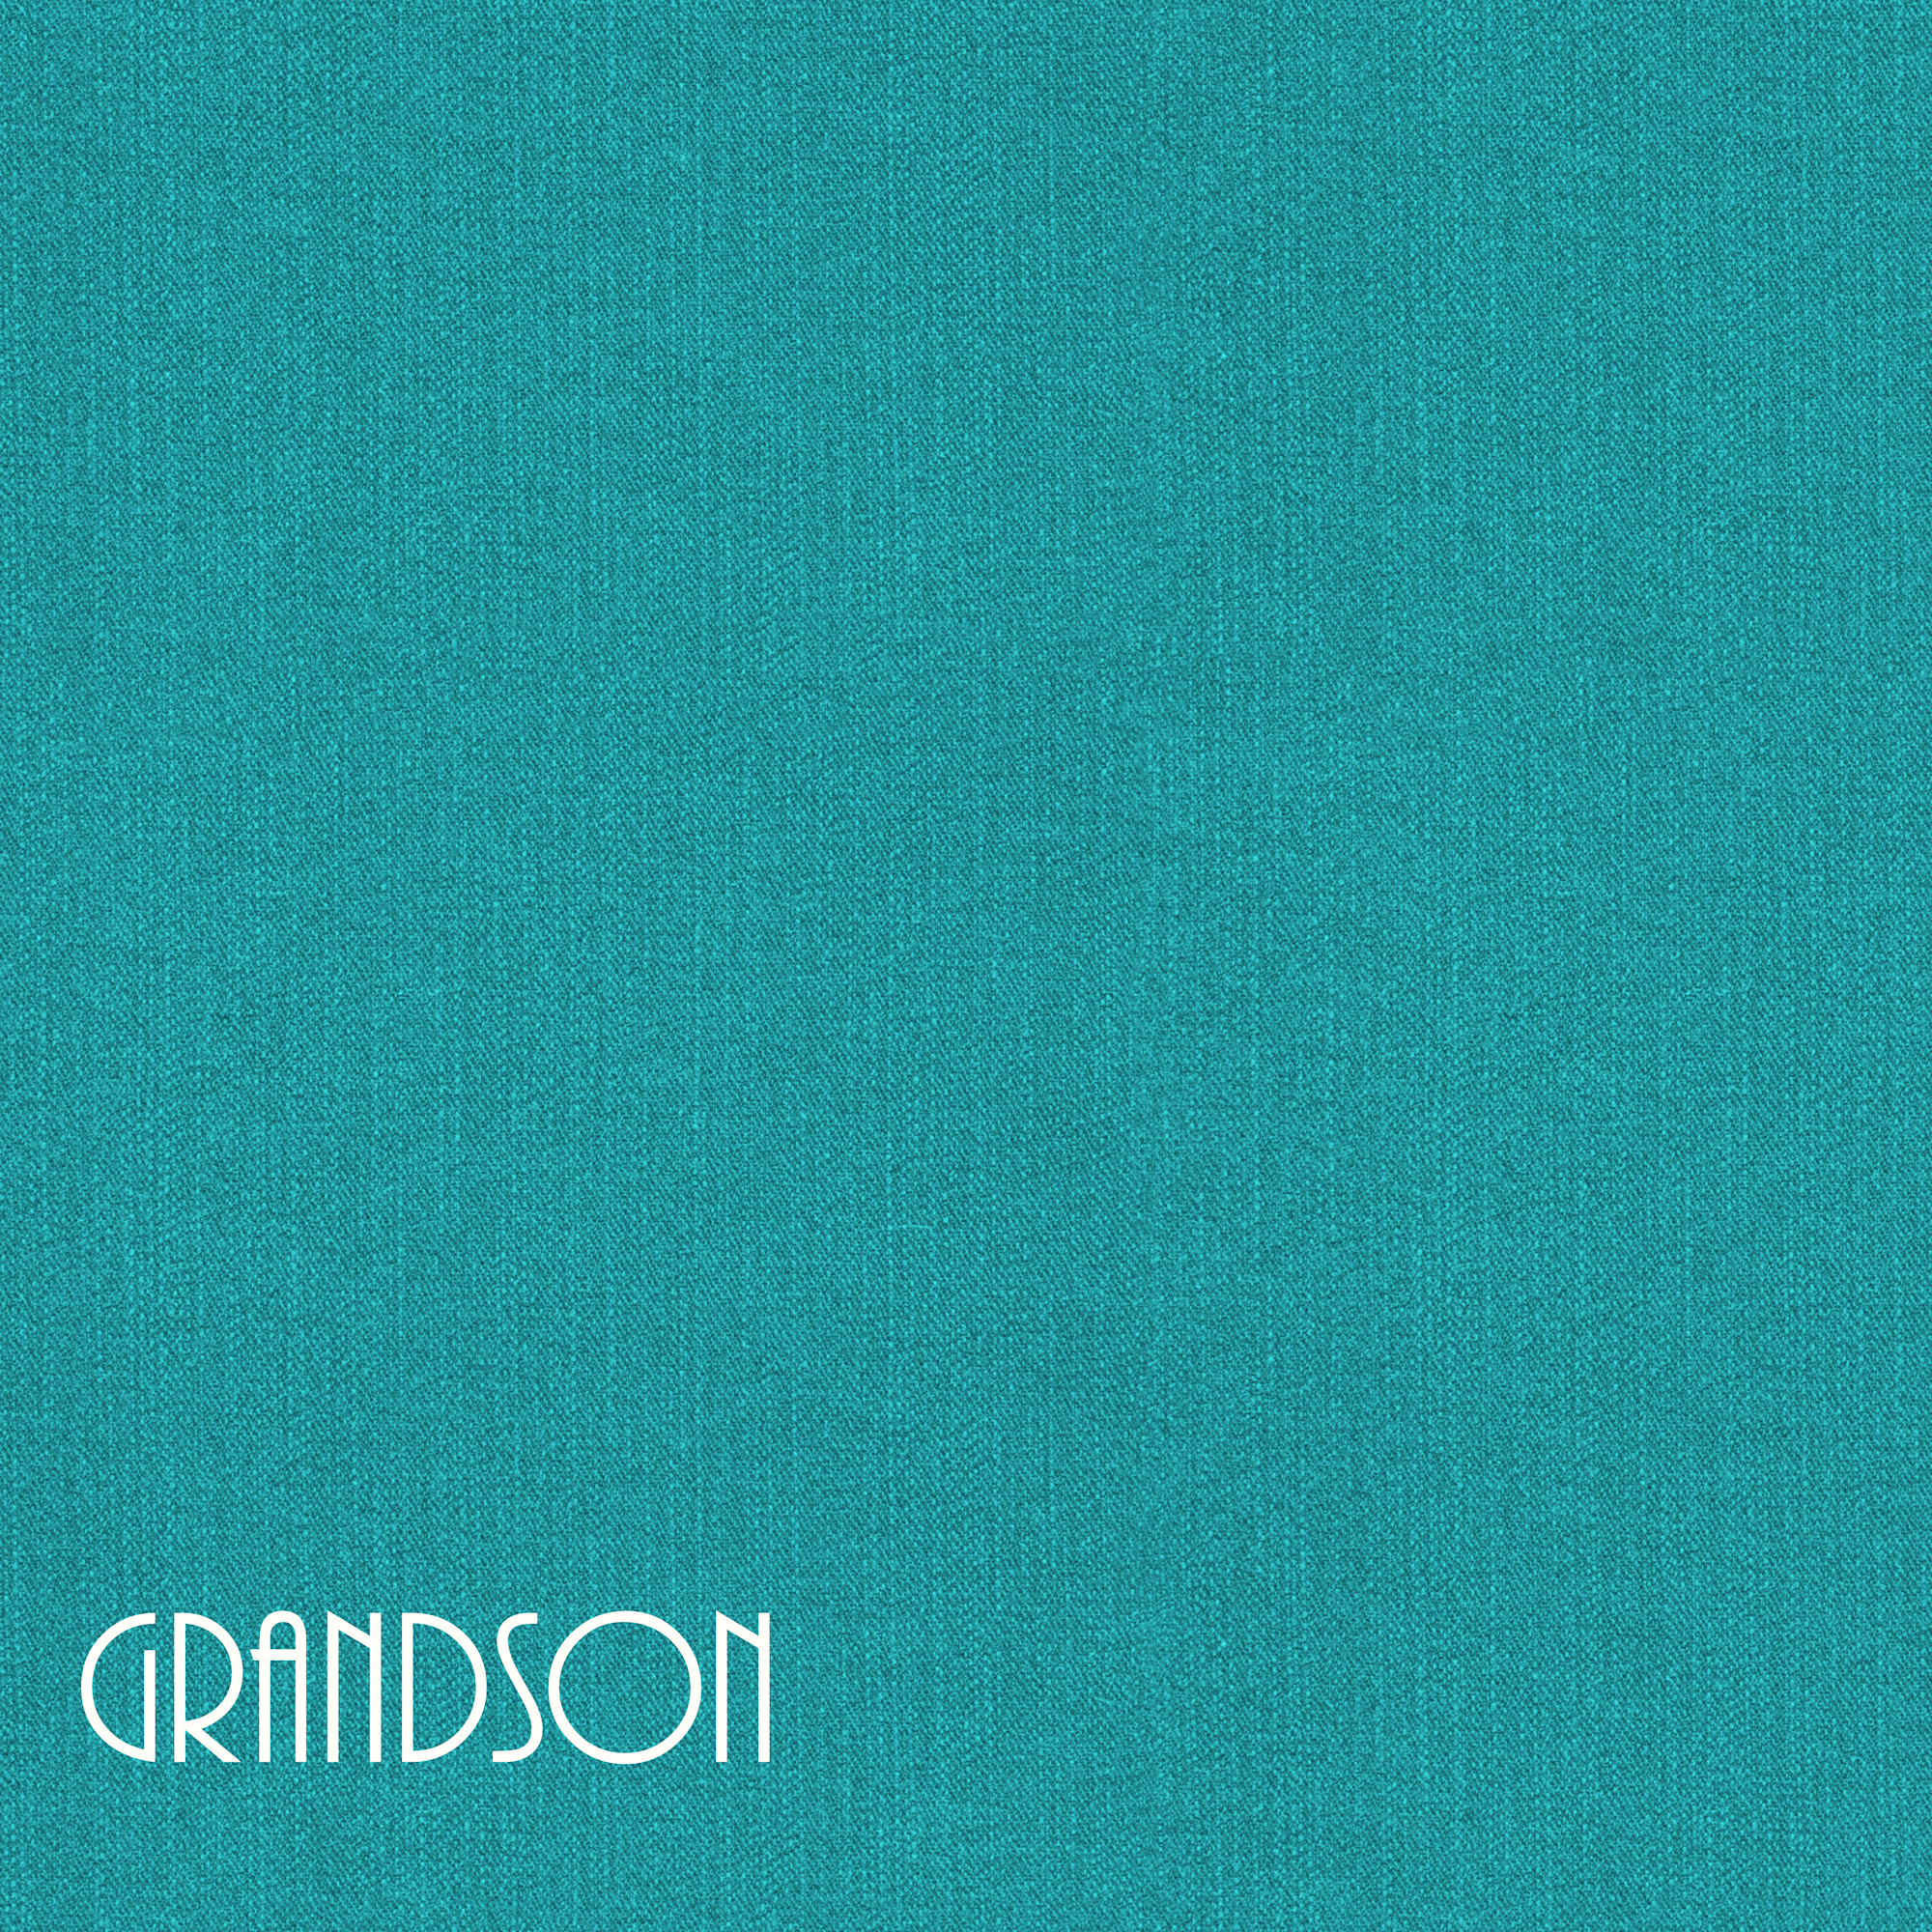 Family Collection Grandson 12 x 12 Double-Sided Scrapbook Paper by SSC Designs